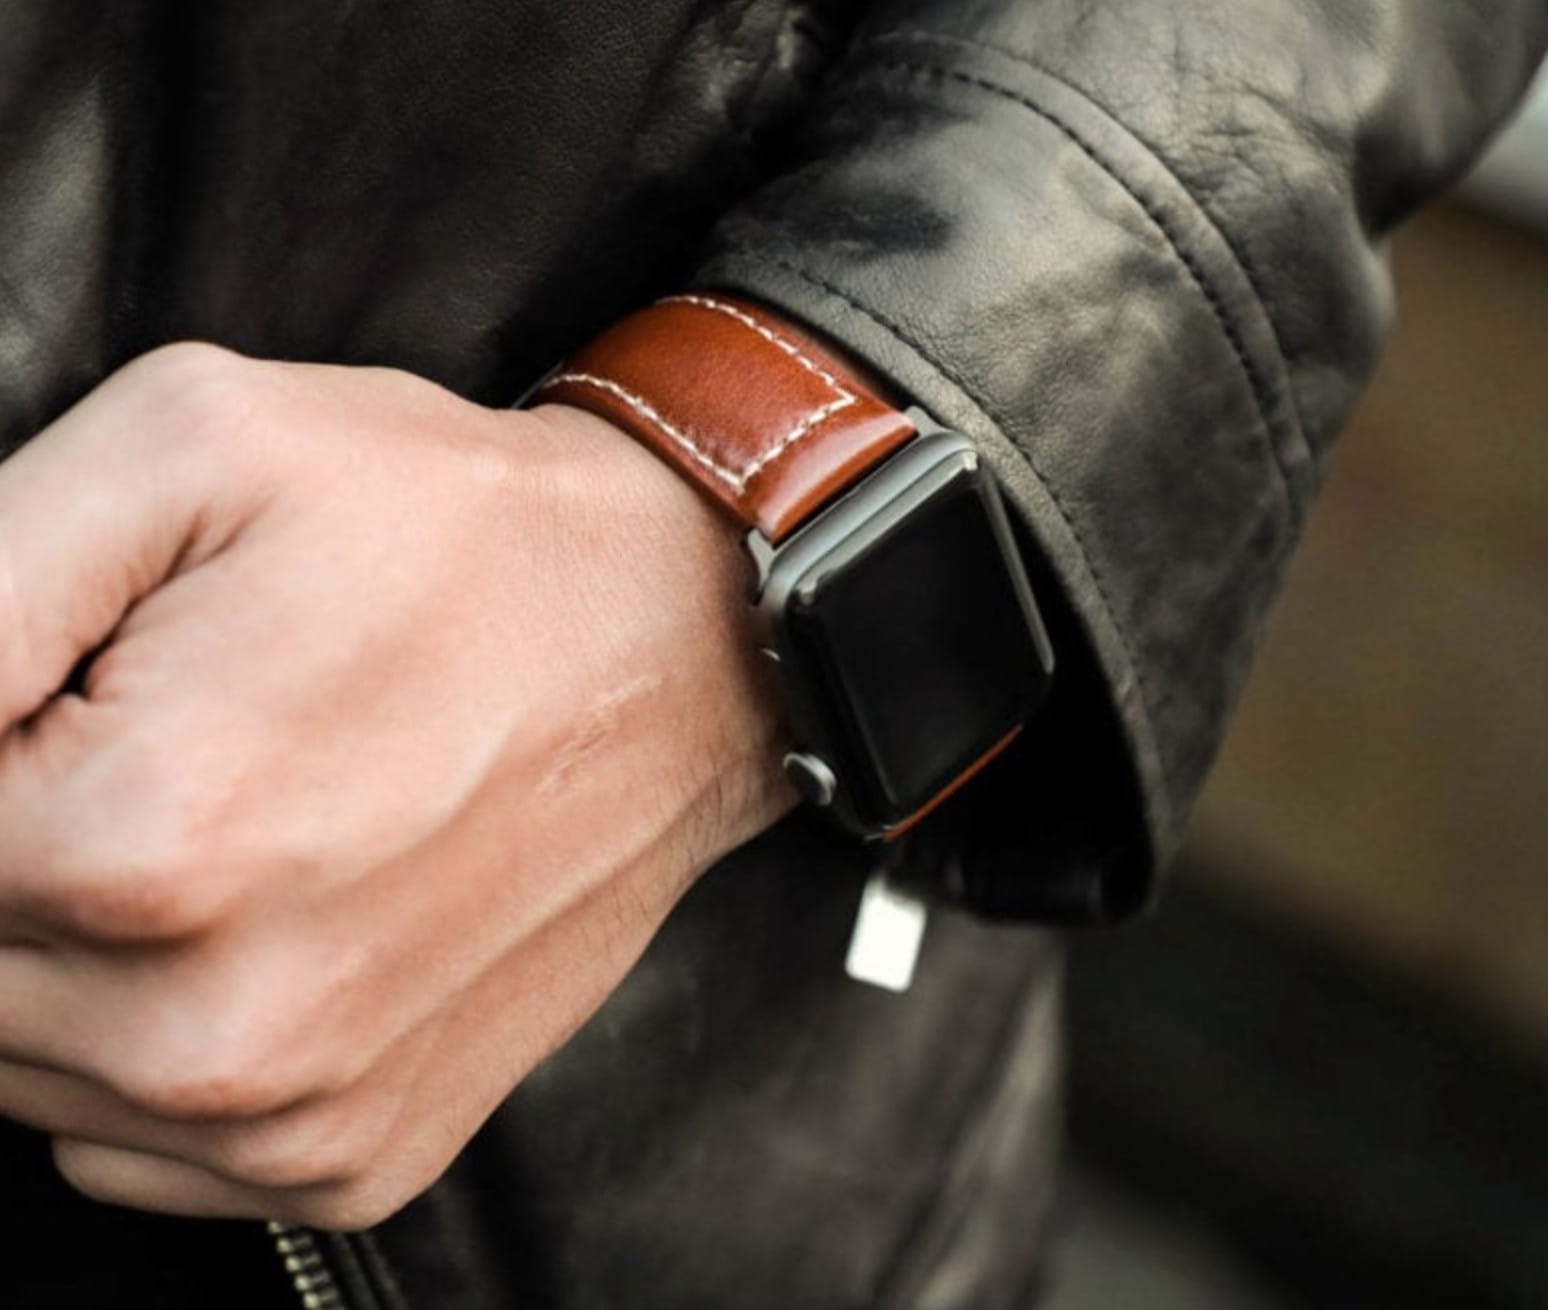 Strapa's Primus is made from rugged and subtly glossy Italian leather, expertly crafted into an exceptional watch band worthy of your Apple Watch Series 4. 